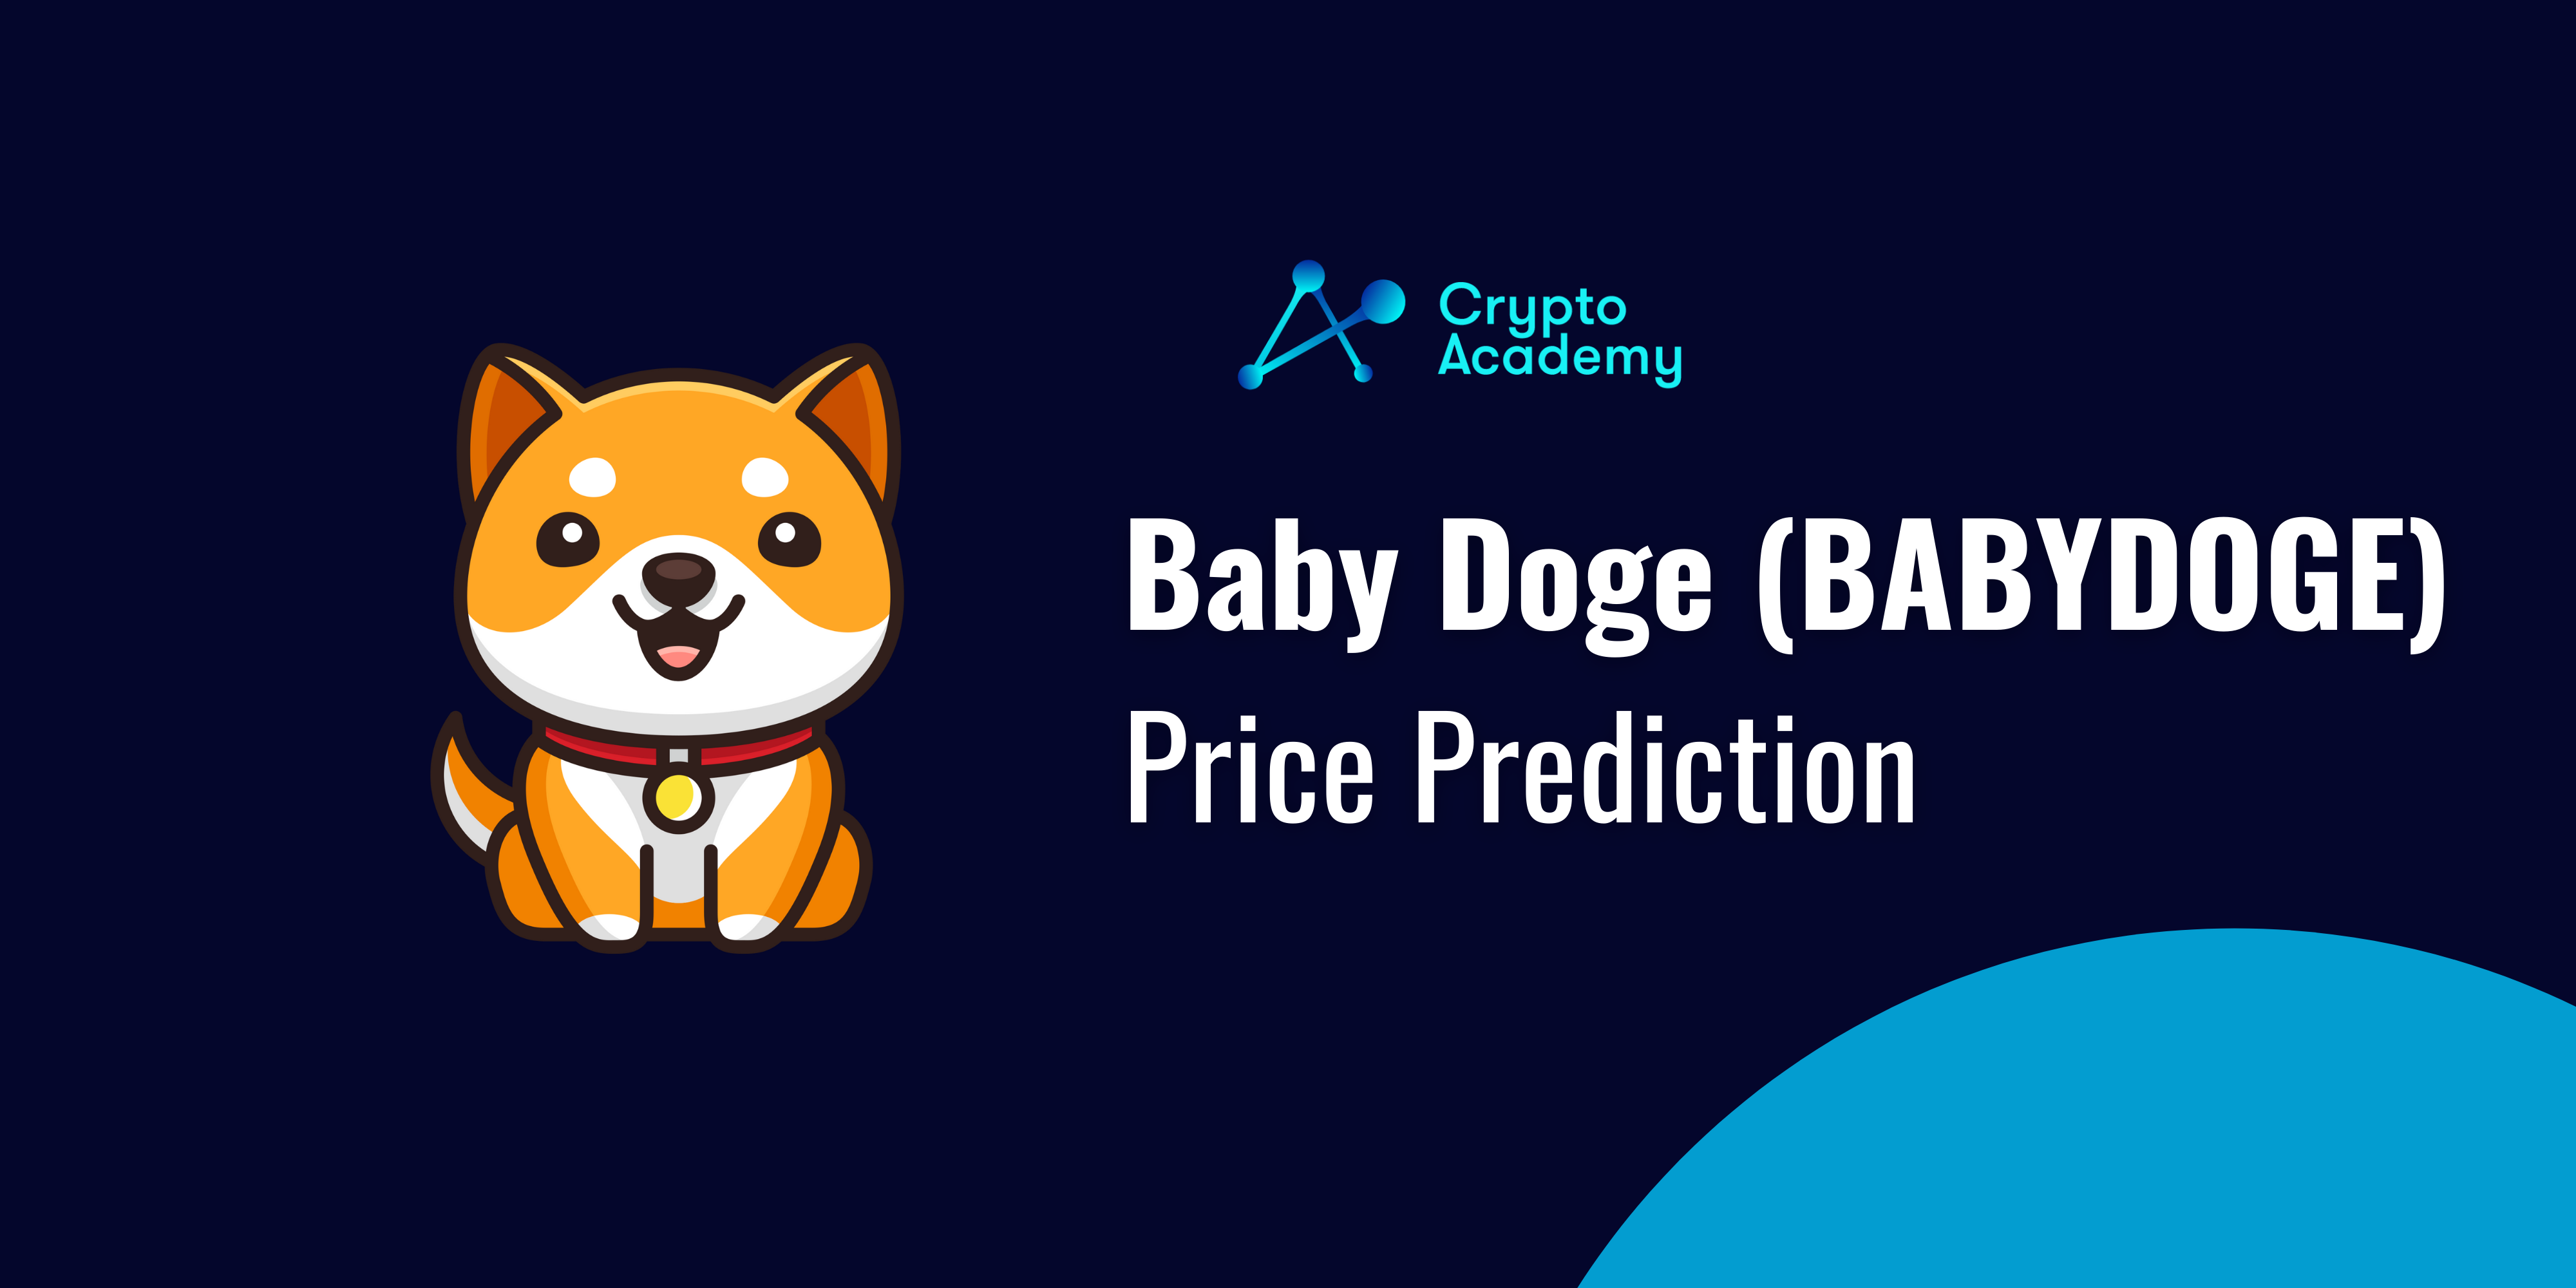 Baby Doge Coin Price Prediction 2022 and Beyond- Can BABYDOGE Eventually Hit $1?